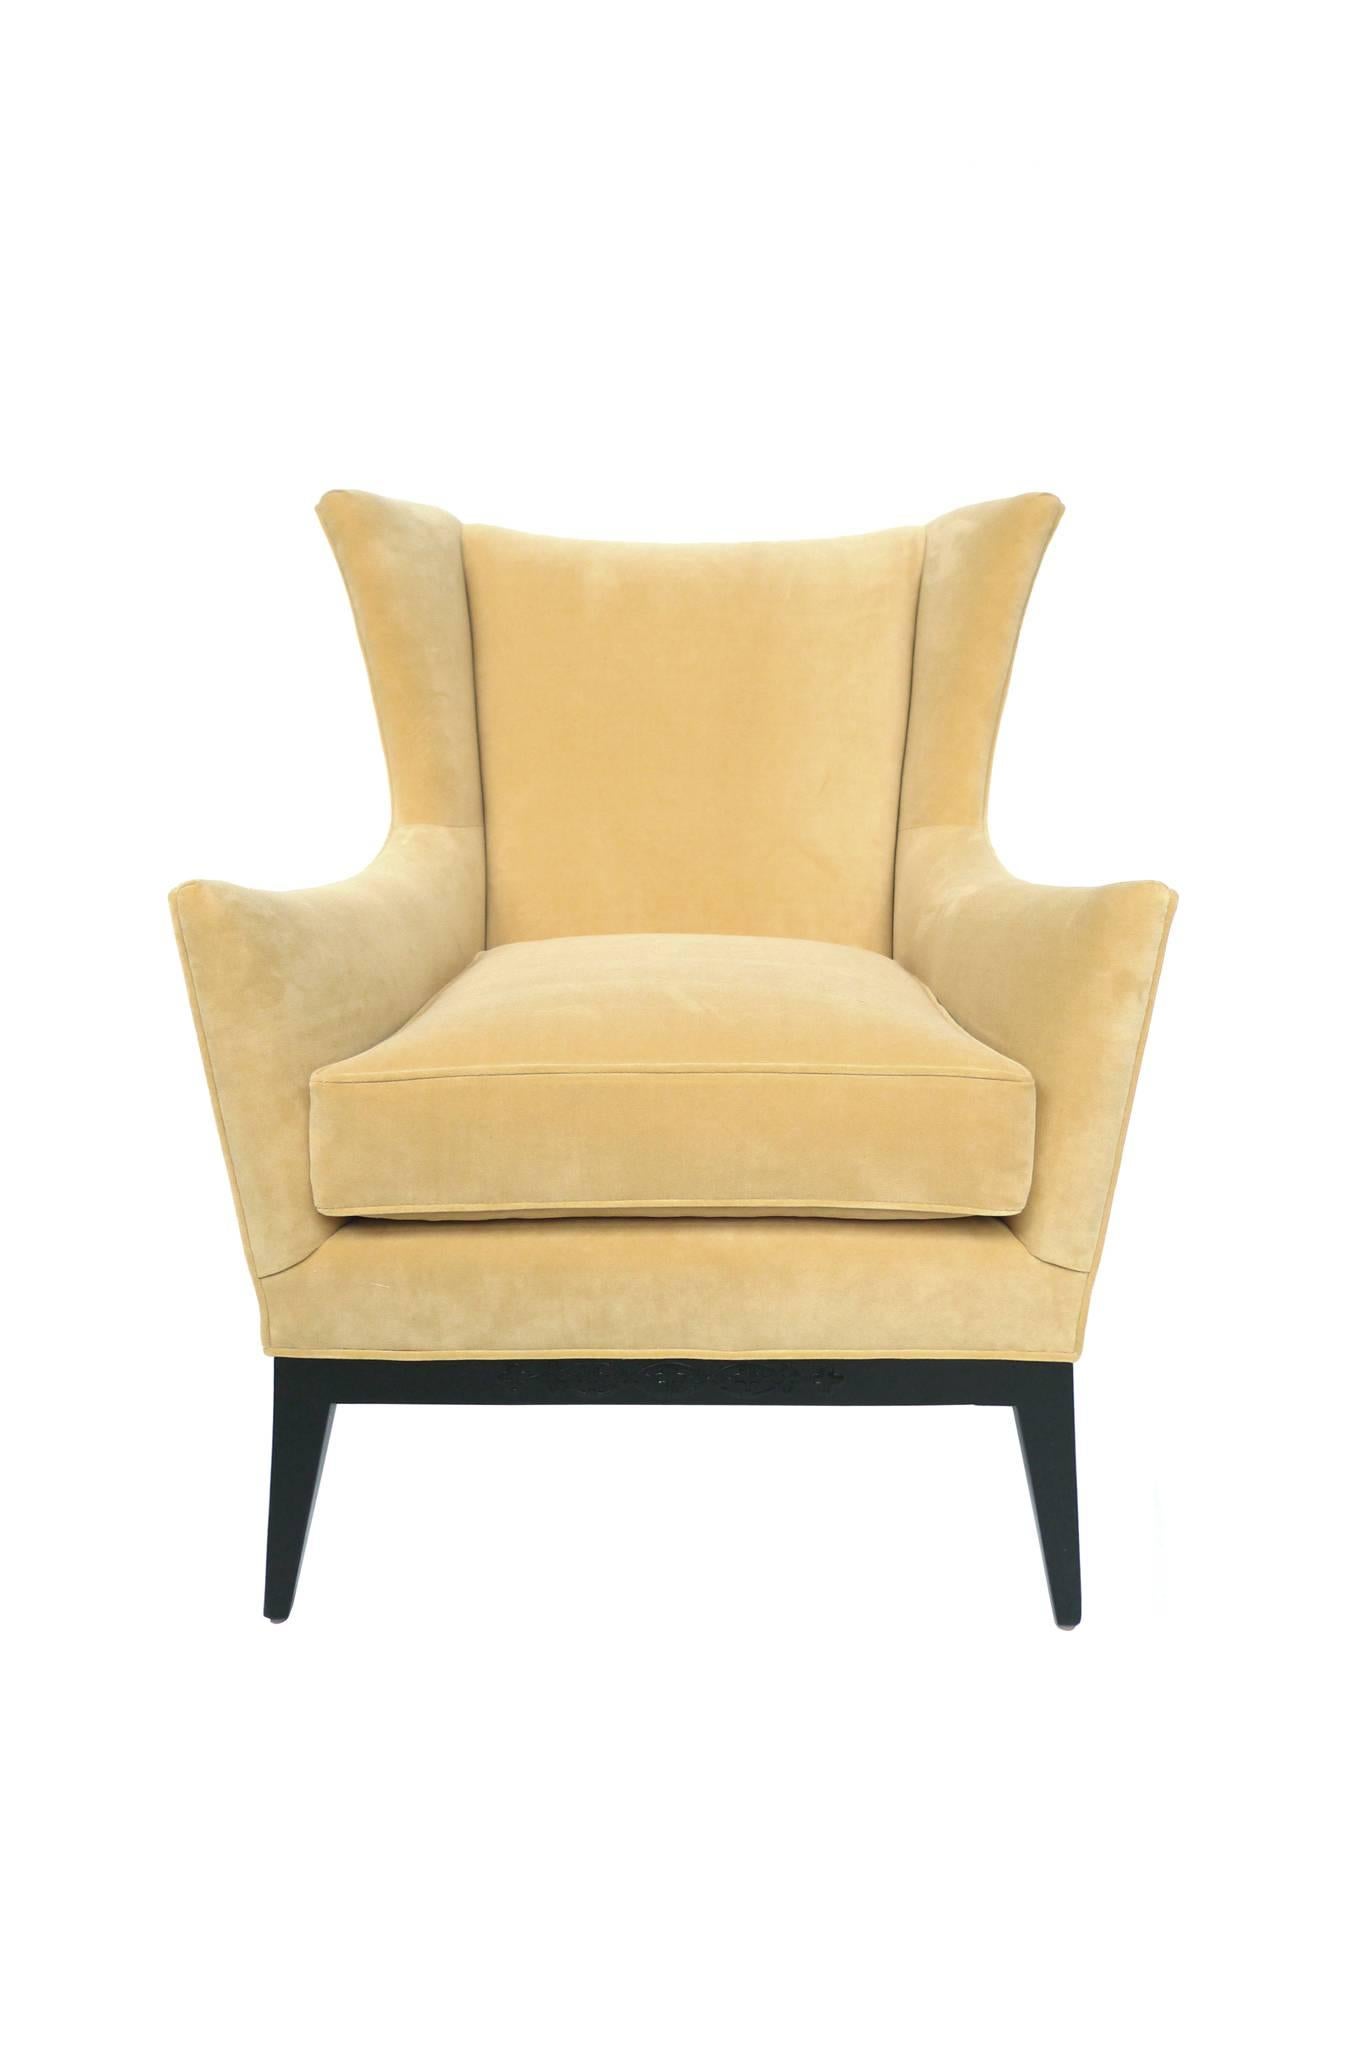 This well-tailored wingback armchair is attributed to James Mont, whose designs elegantly combined Modern and Art Deco designs. This chair is newly reupholstered in a soft, Naples yellow Duralee polyester velvet. The Fine piping is also done in this